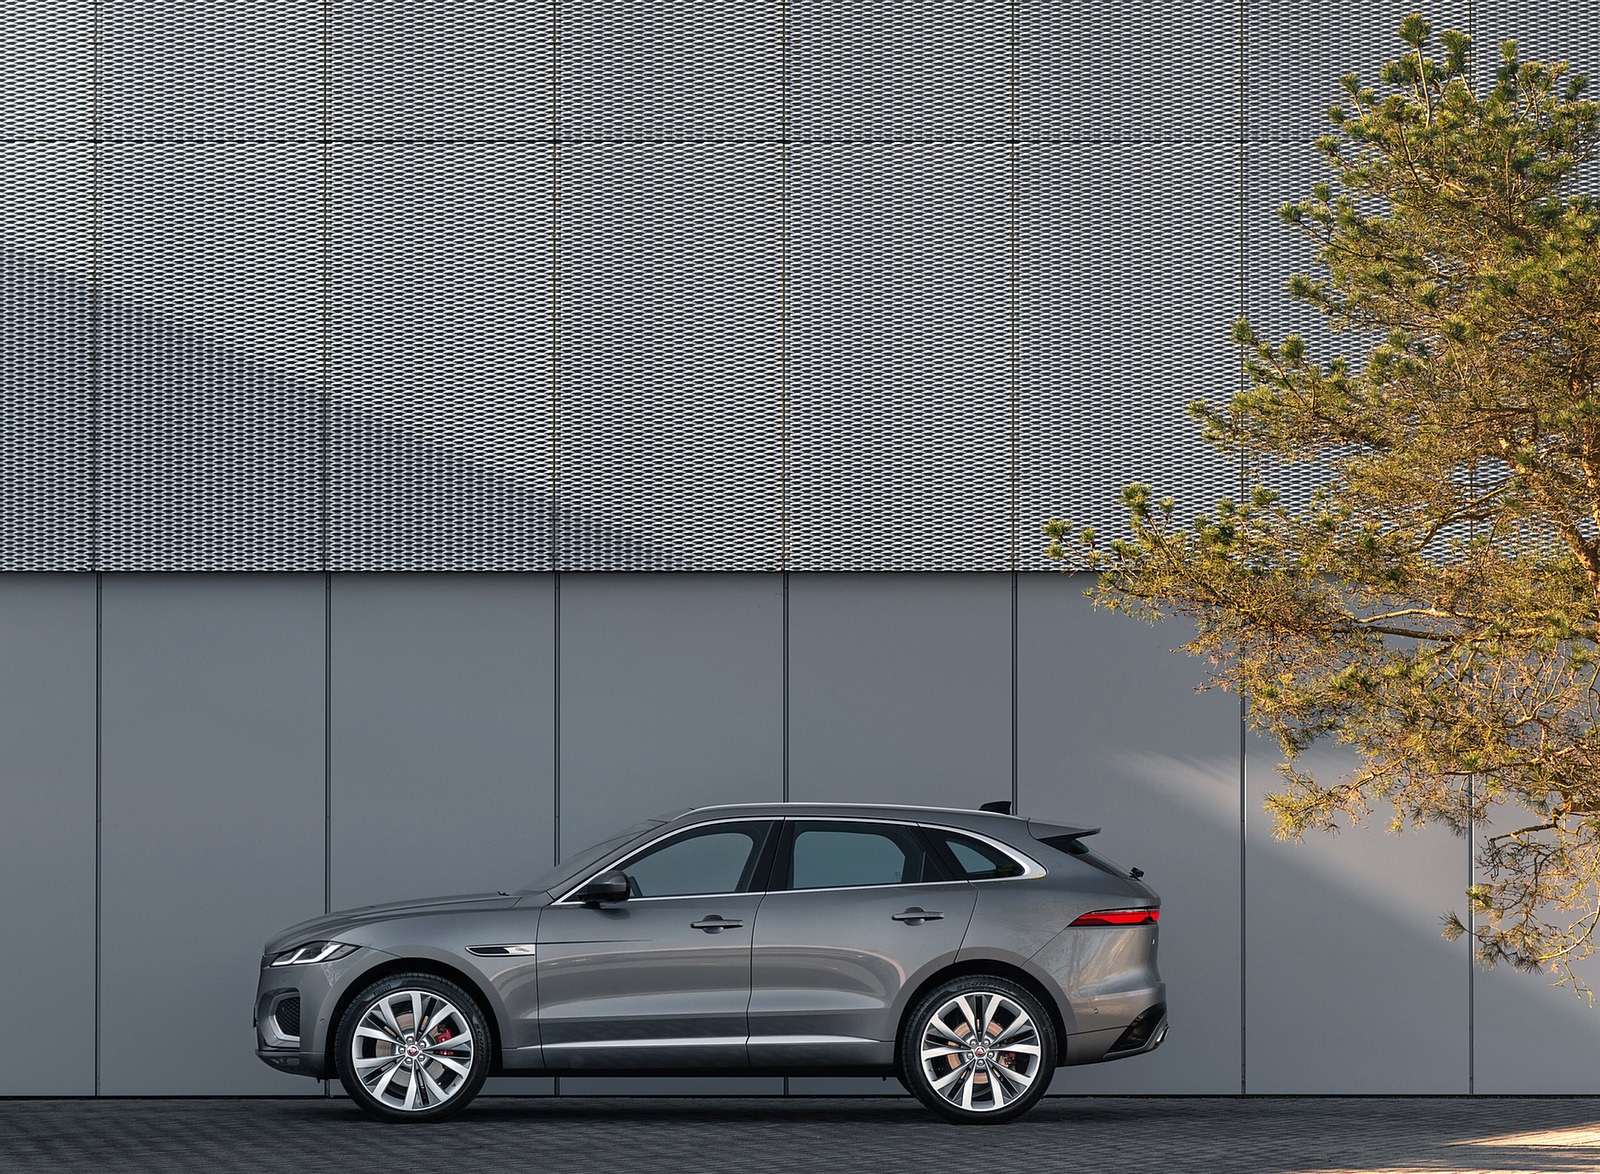 2021 Jaguar F-PACE Side Wallpapers  #37 of 88